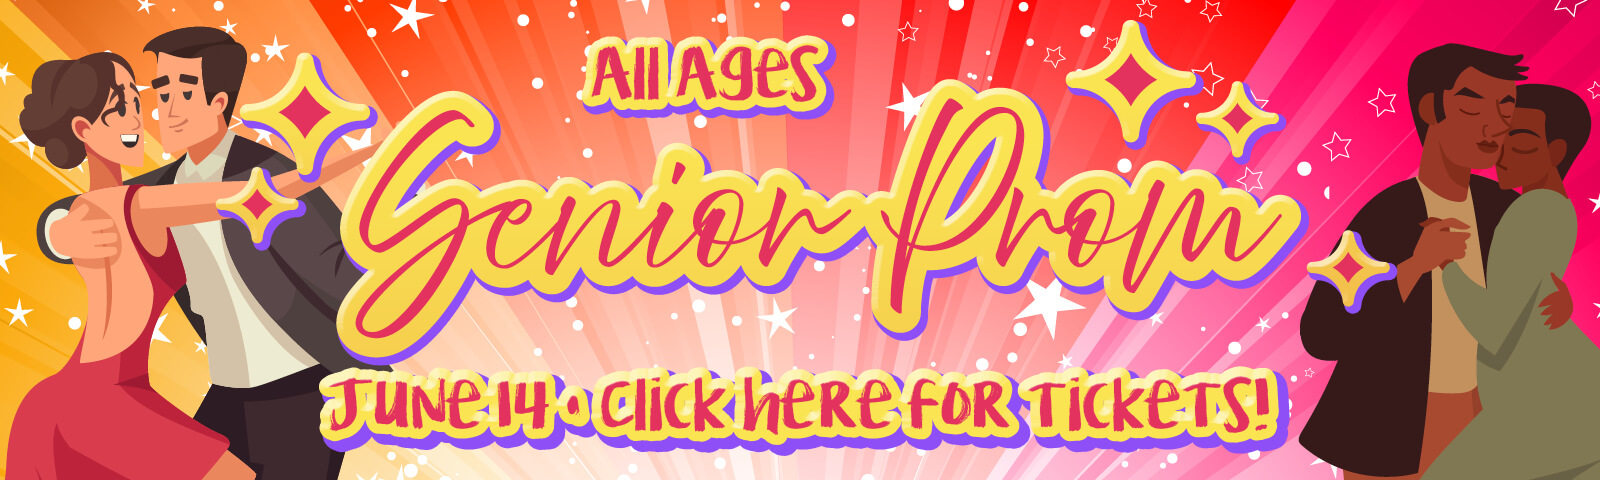 All Ages Senior Prom! Friday, June 14 • Click here for tickets!